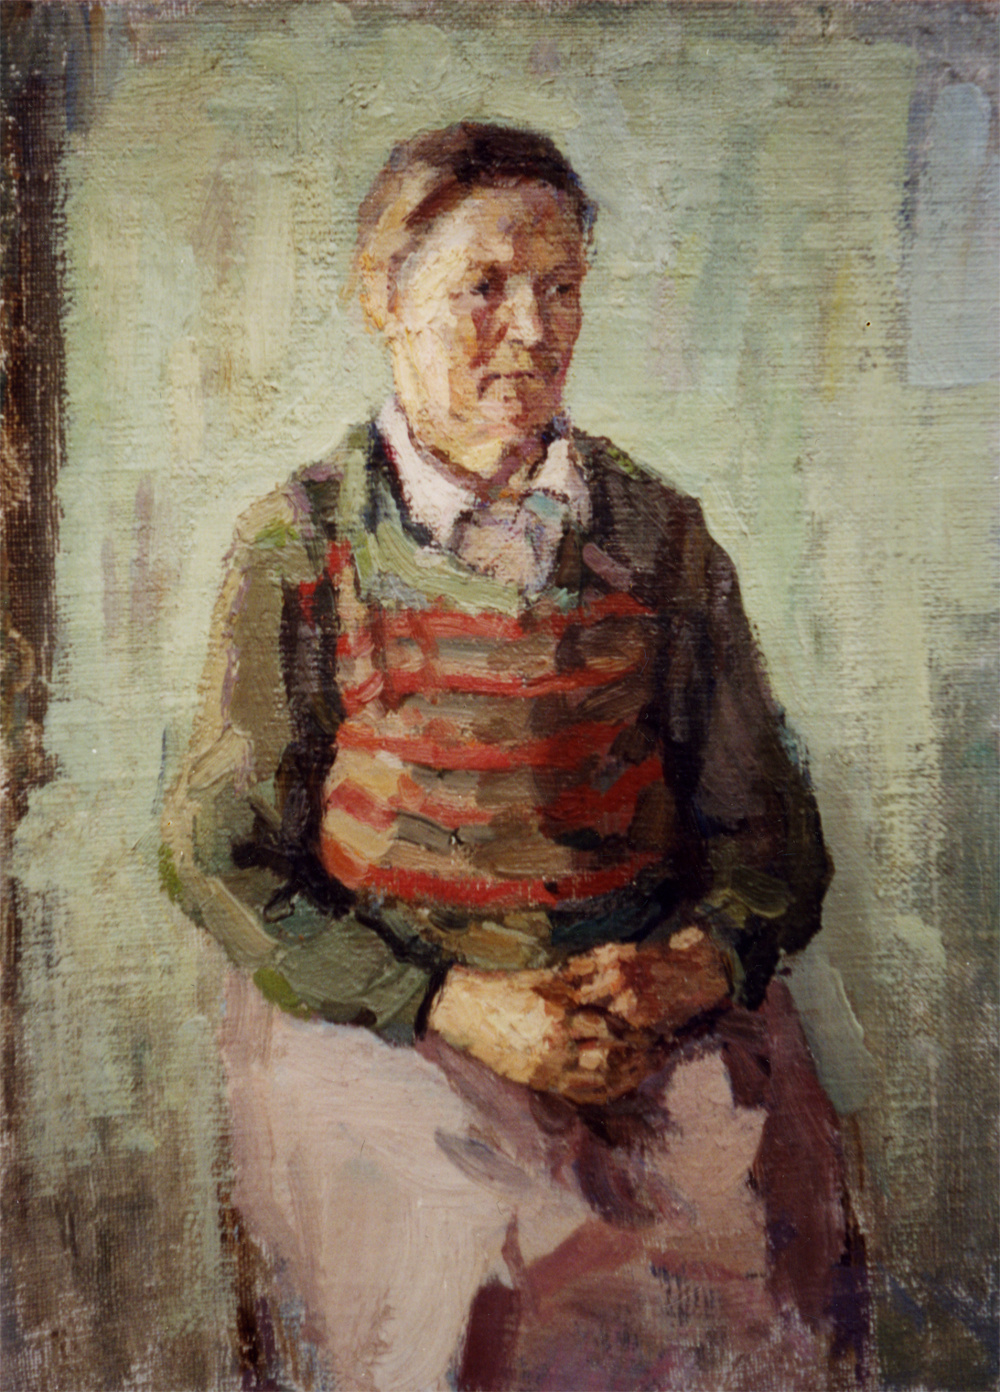 The sitting old woman